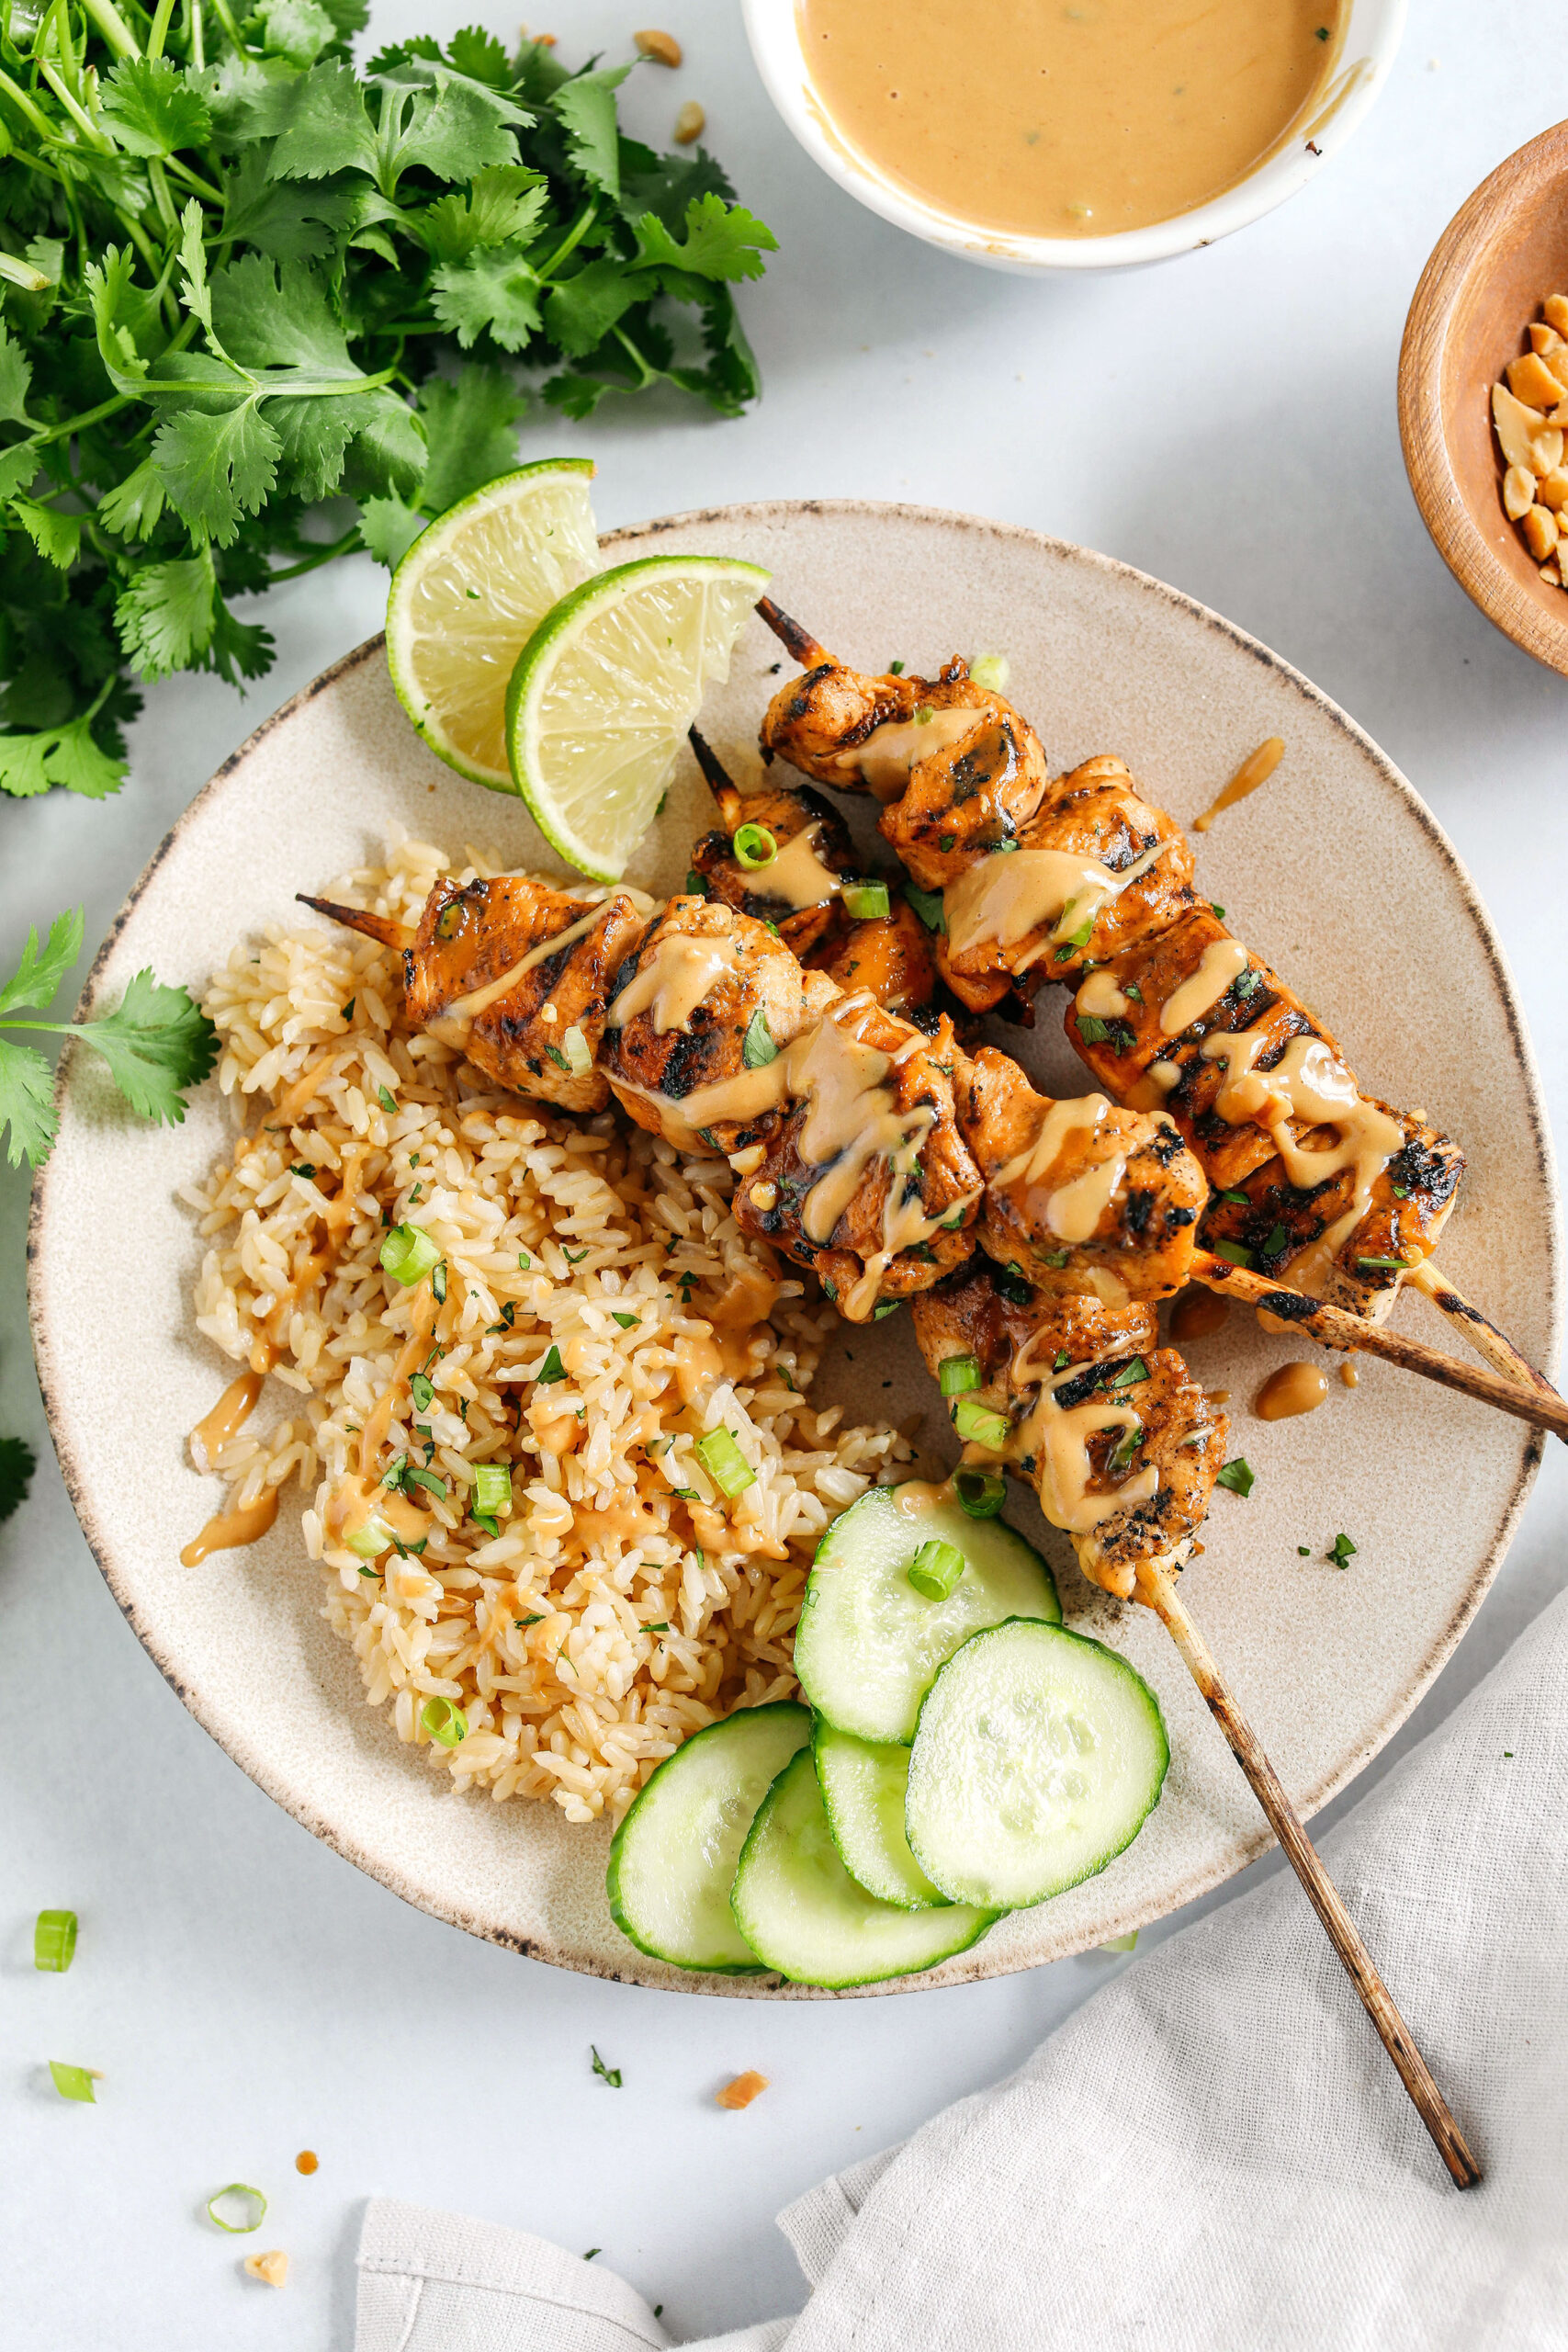 Tender and juicy Chicken Satay marinated in the most delicious peanut ginger sauce and grilled to perfection for the perfect easy weeknight dinner!  Serve over rice or salad and drizzled with my homemade peanut sauce.